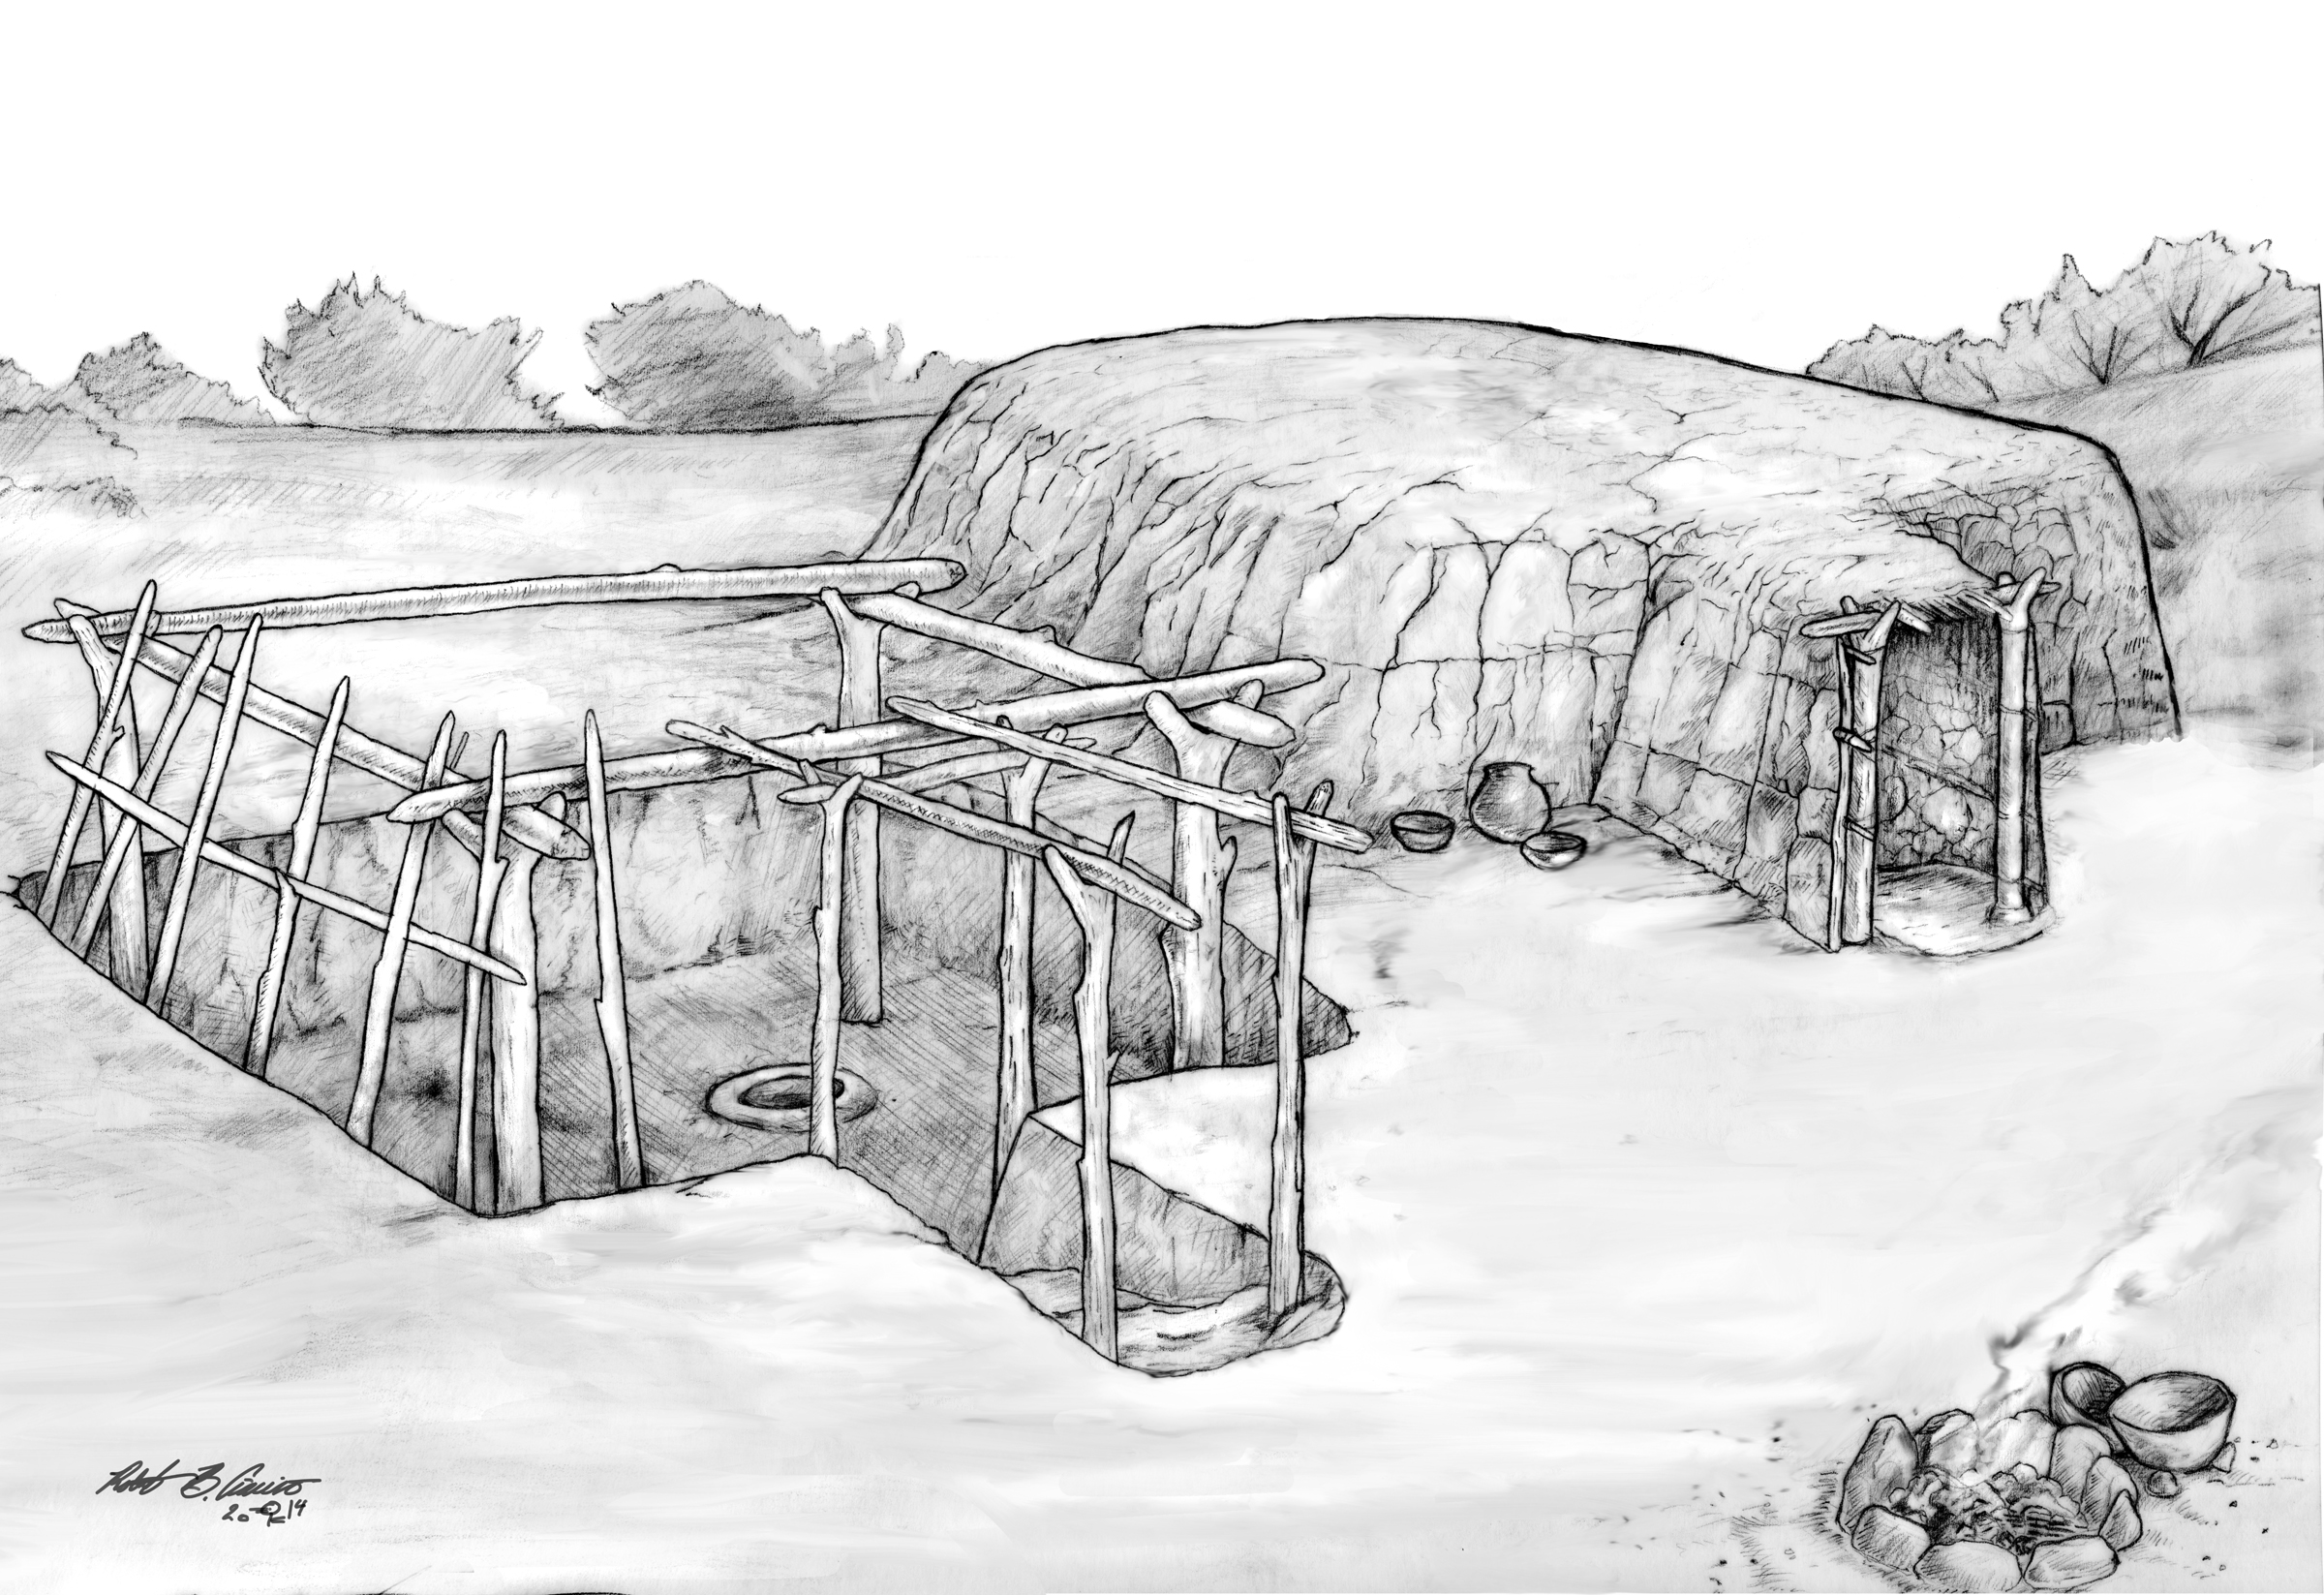 Desert Archaeology illustration answering the question what is a pithouse